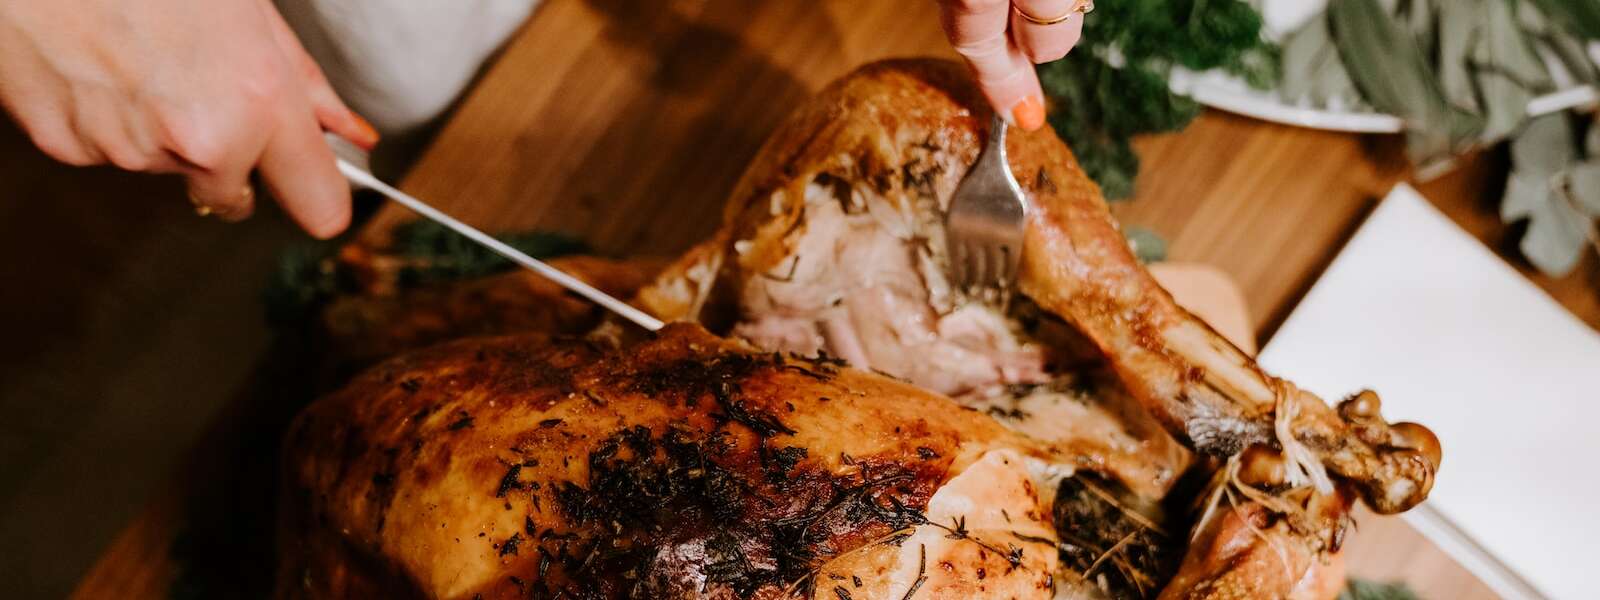 A person carves into a turkey.